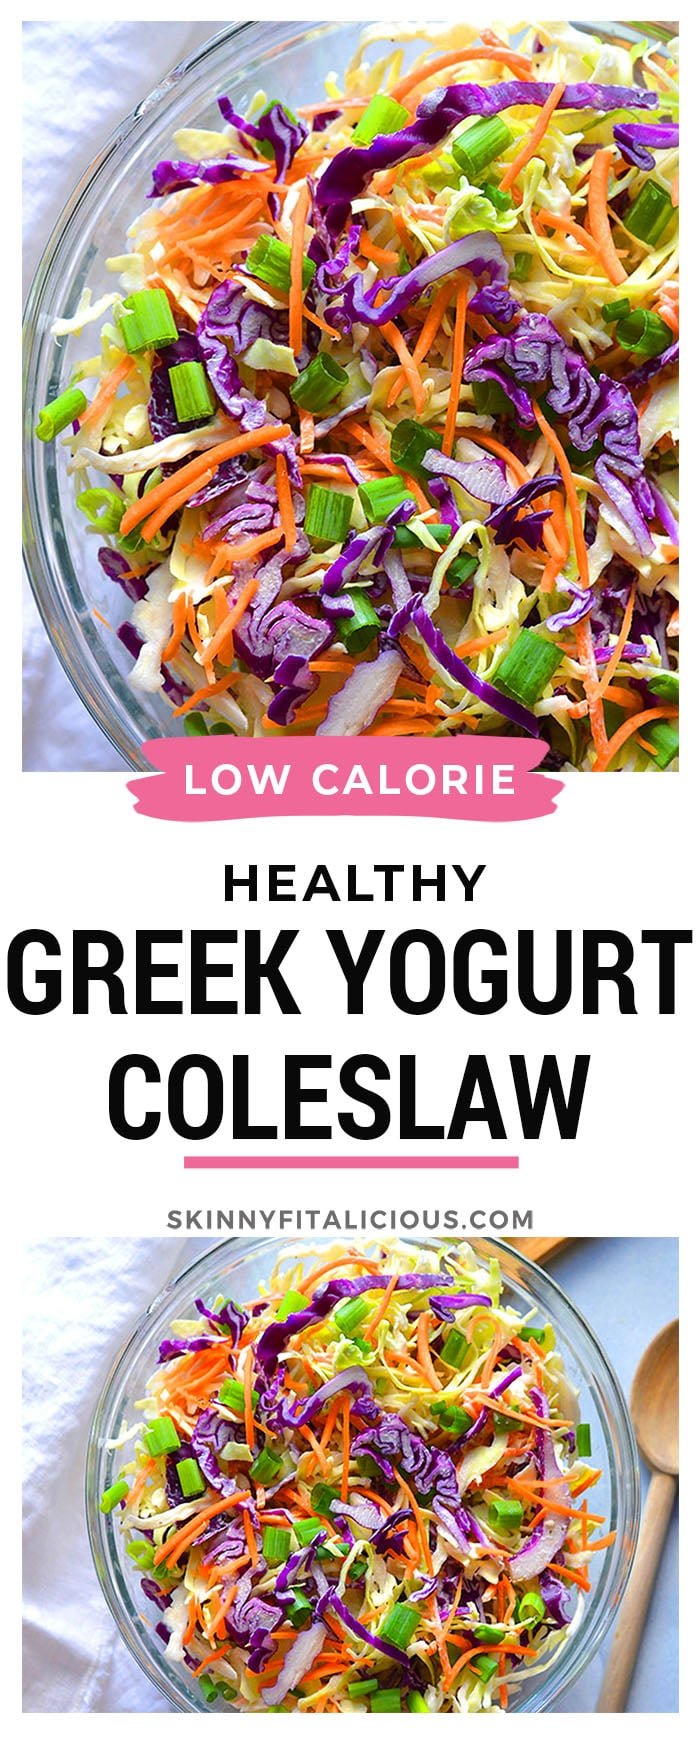 Healthy Low Calorie Coleslaw made with Greek yogurt instead of mayo and no added sugar. This simple, healthy coleslaw recipe is bursting with vegetables and nutrients while being lower in calories and fat.